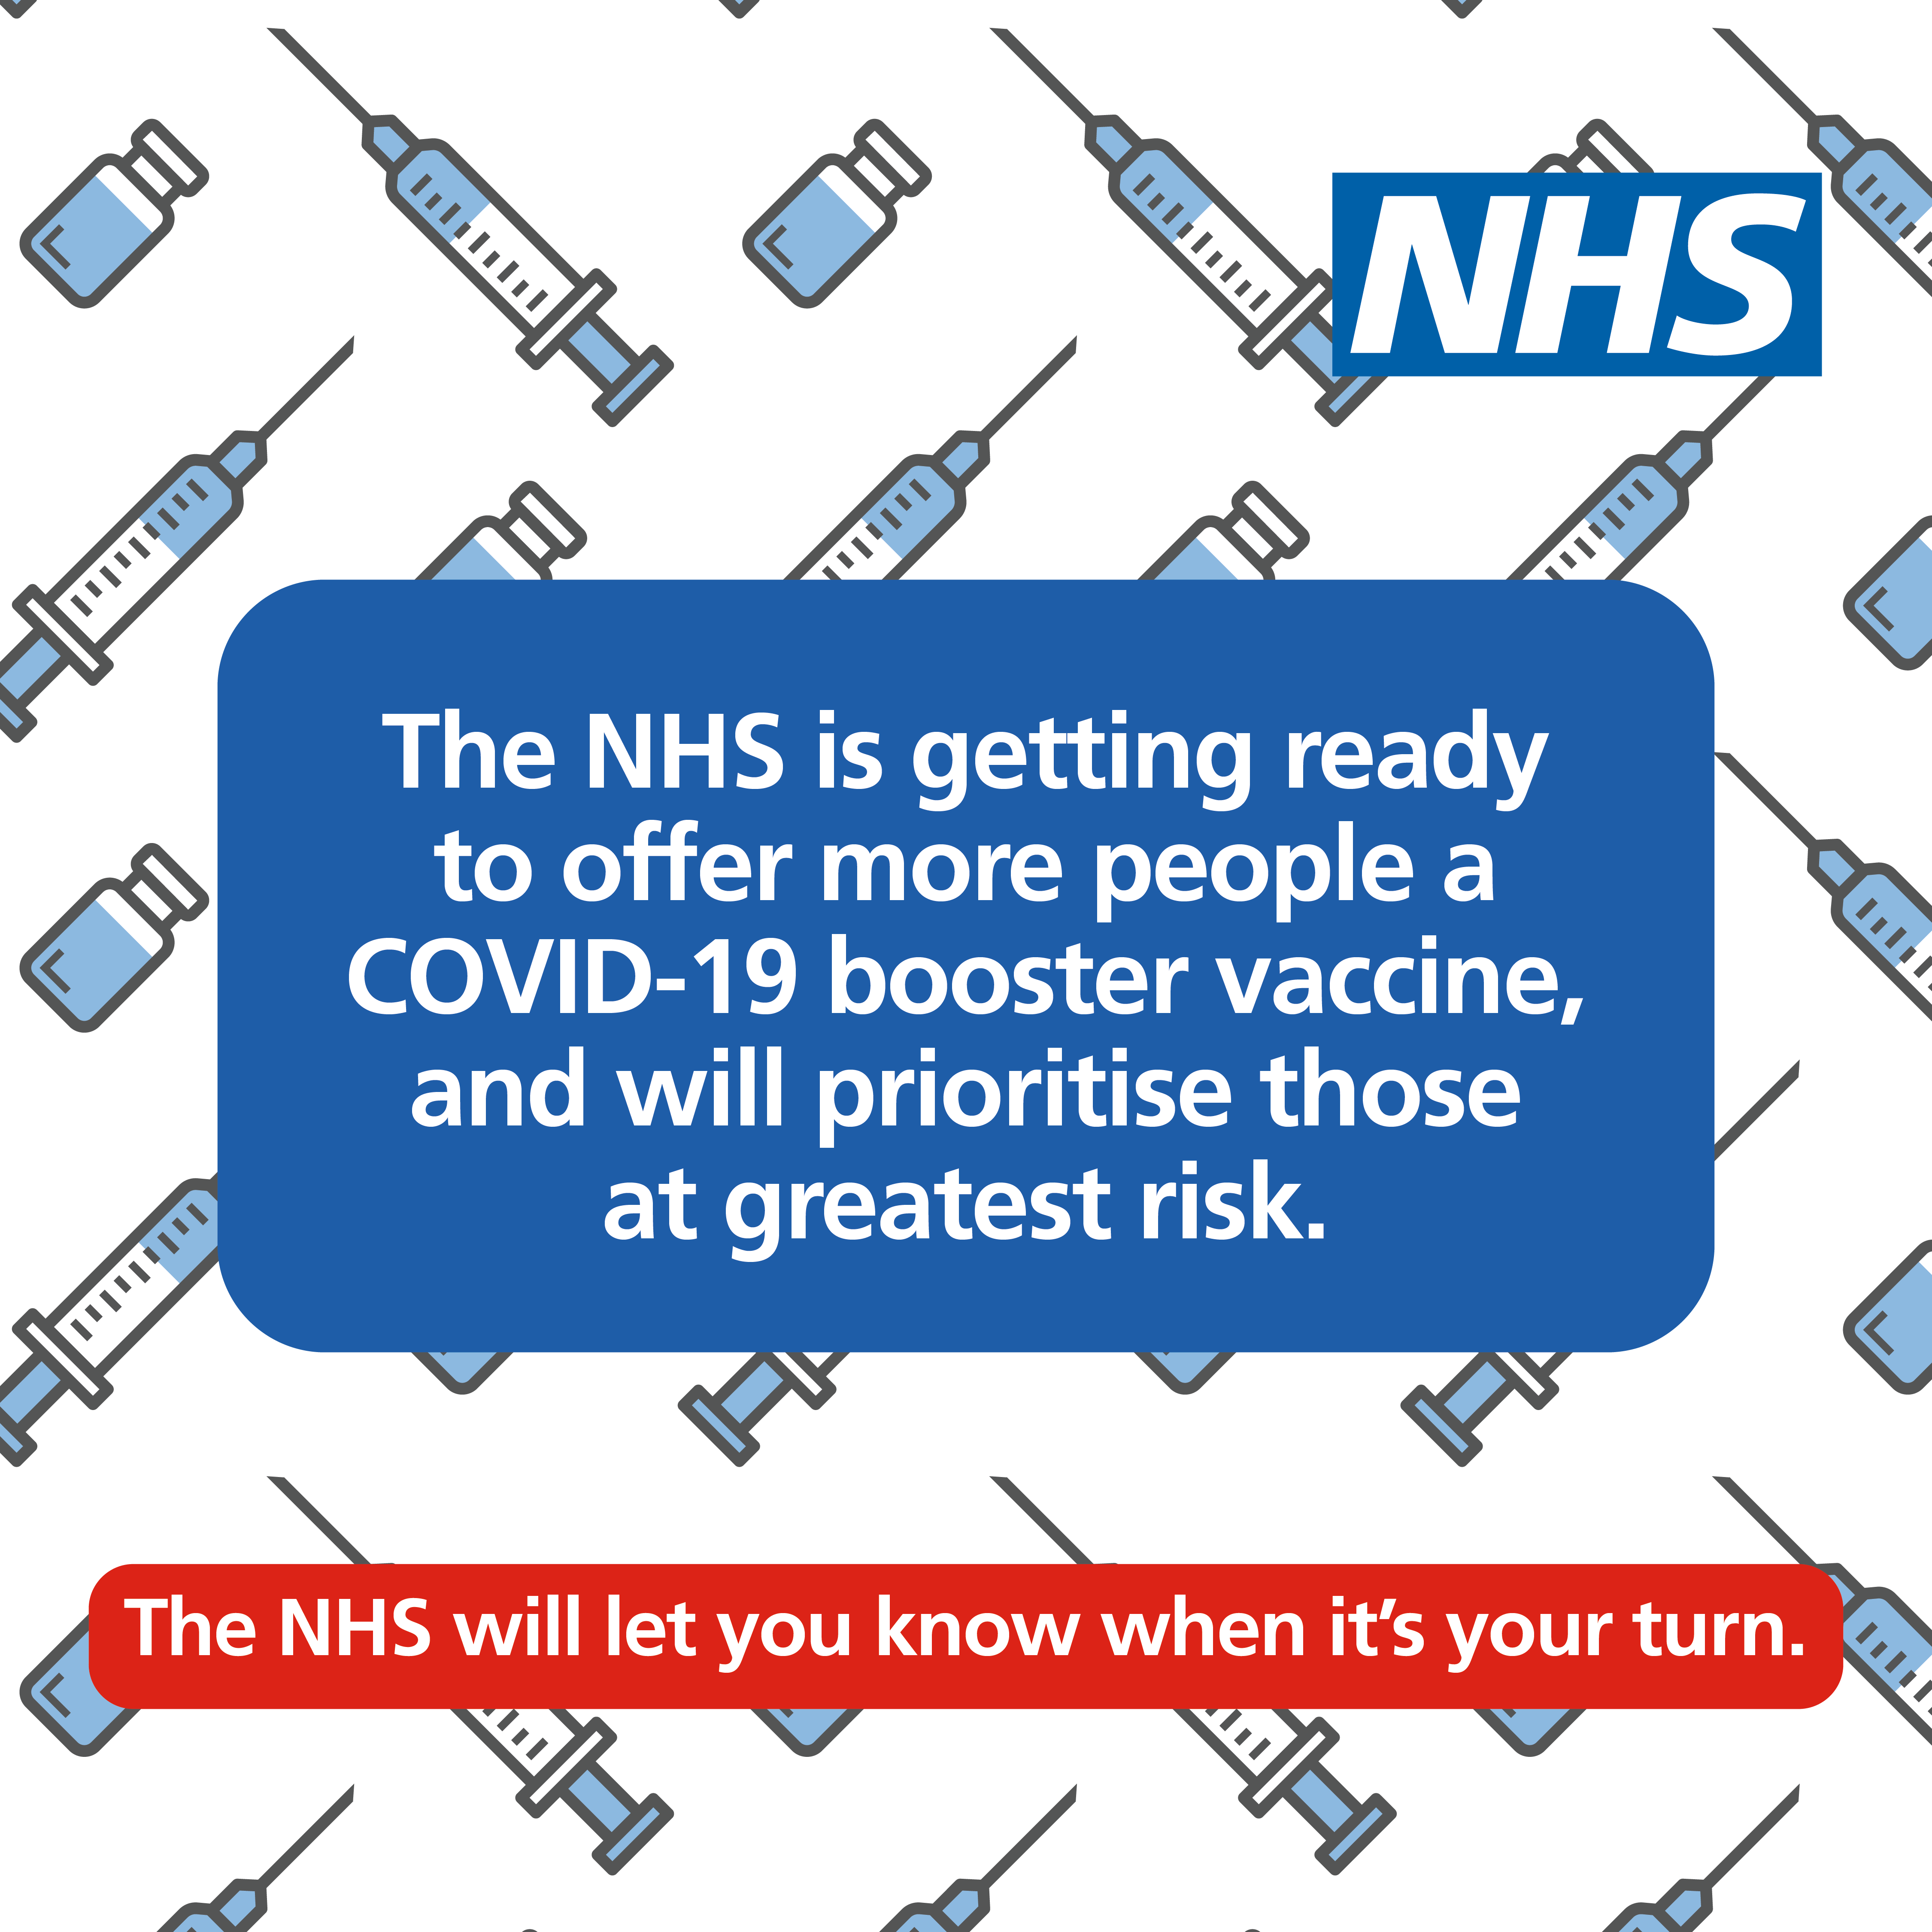 The NHS is getting ready to offer more people a COVID-19 booster vaccine, and will prioritise those at greatest risk. The NHS will let you know when it